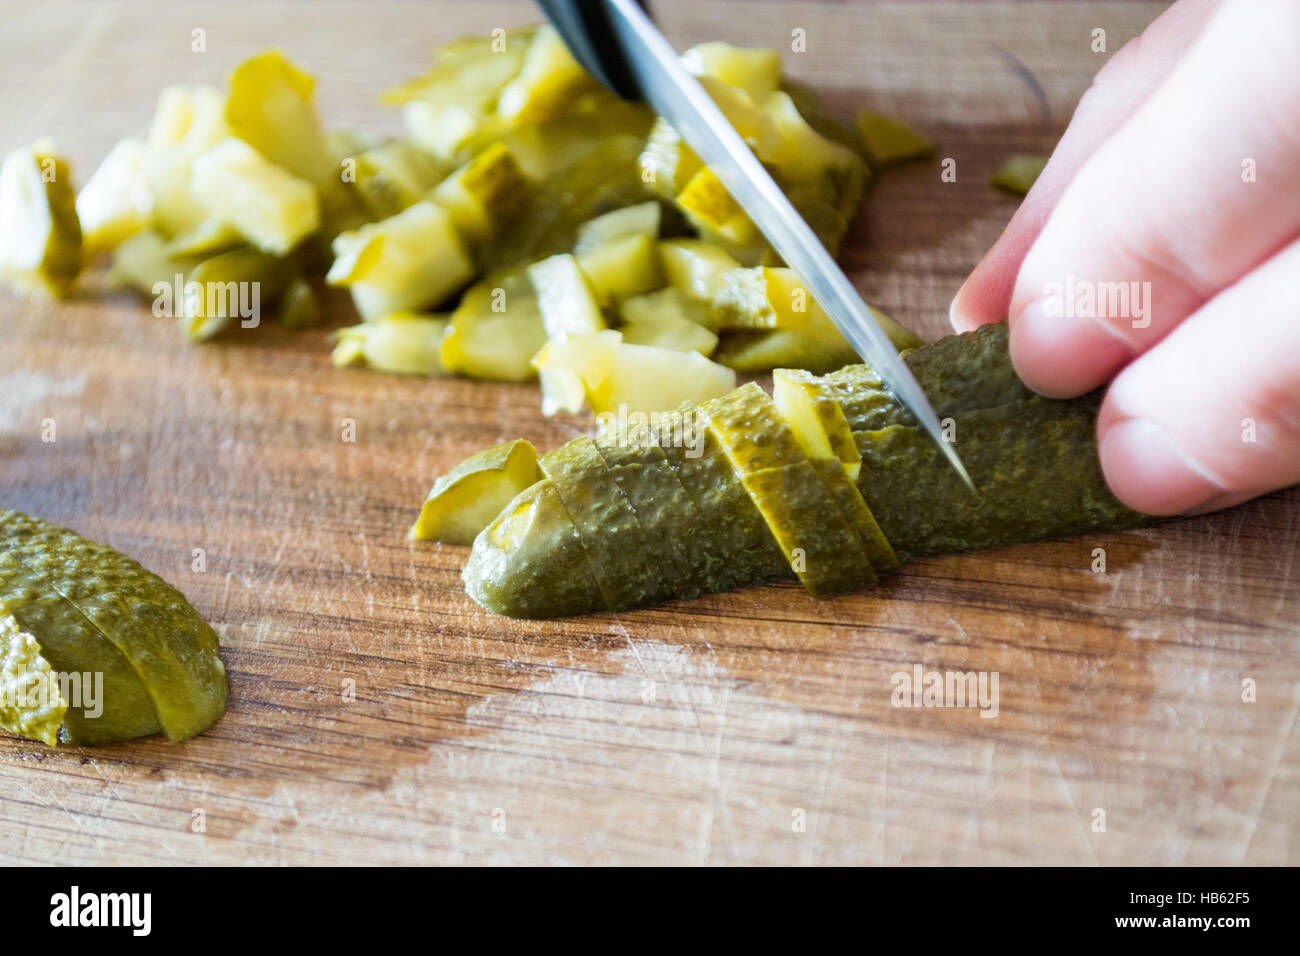 Cutting pickles Stock Photo